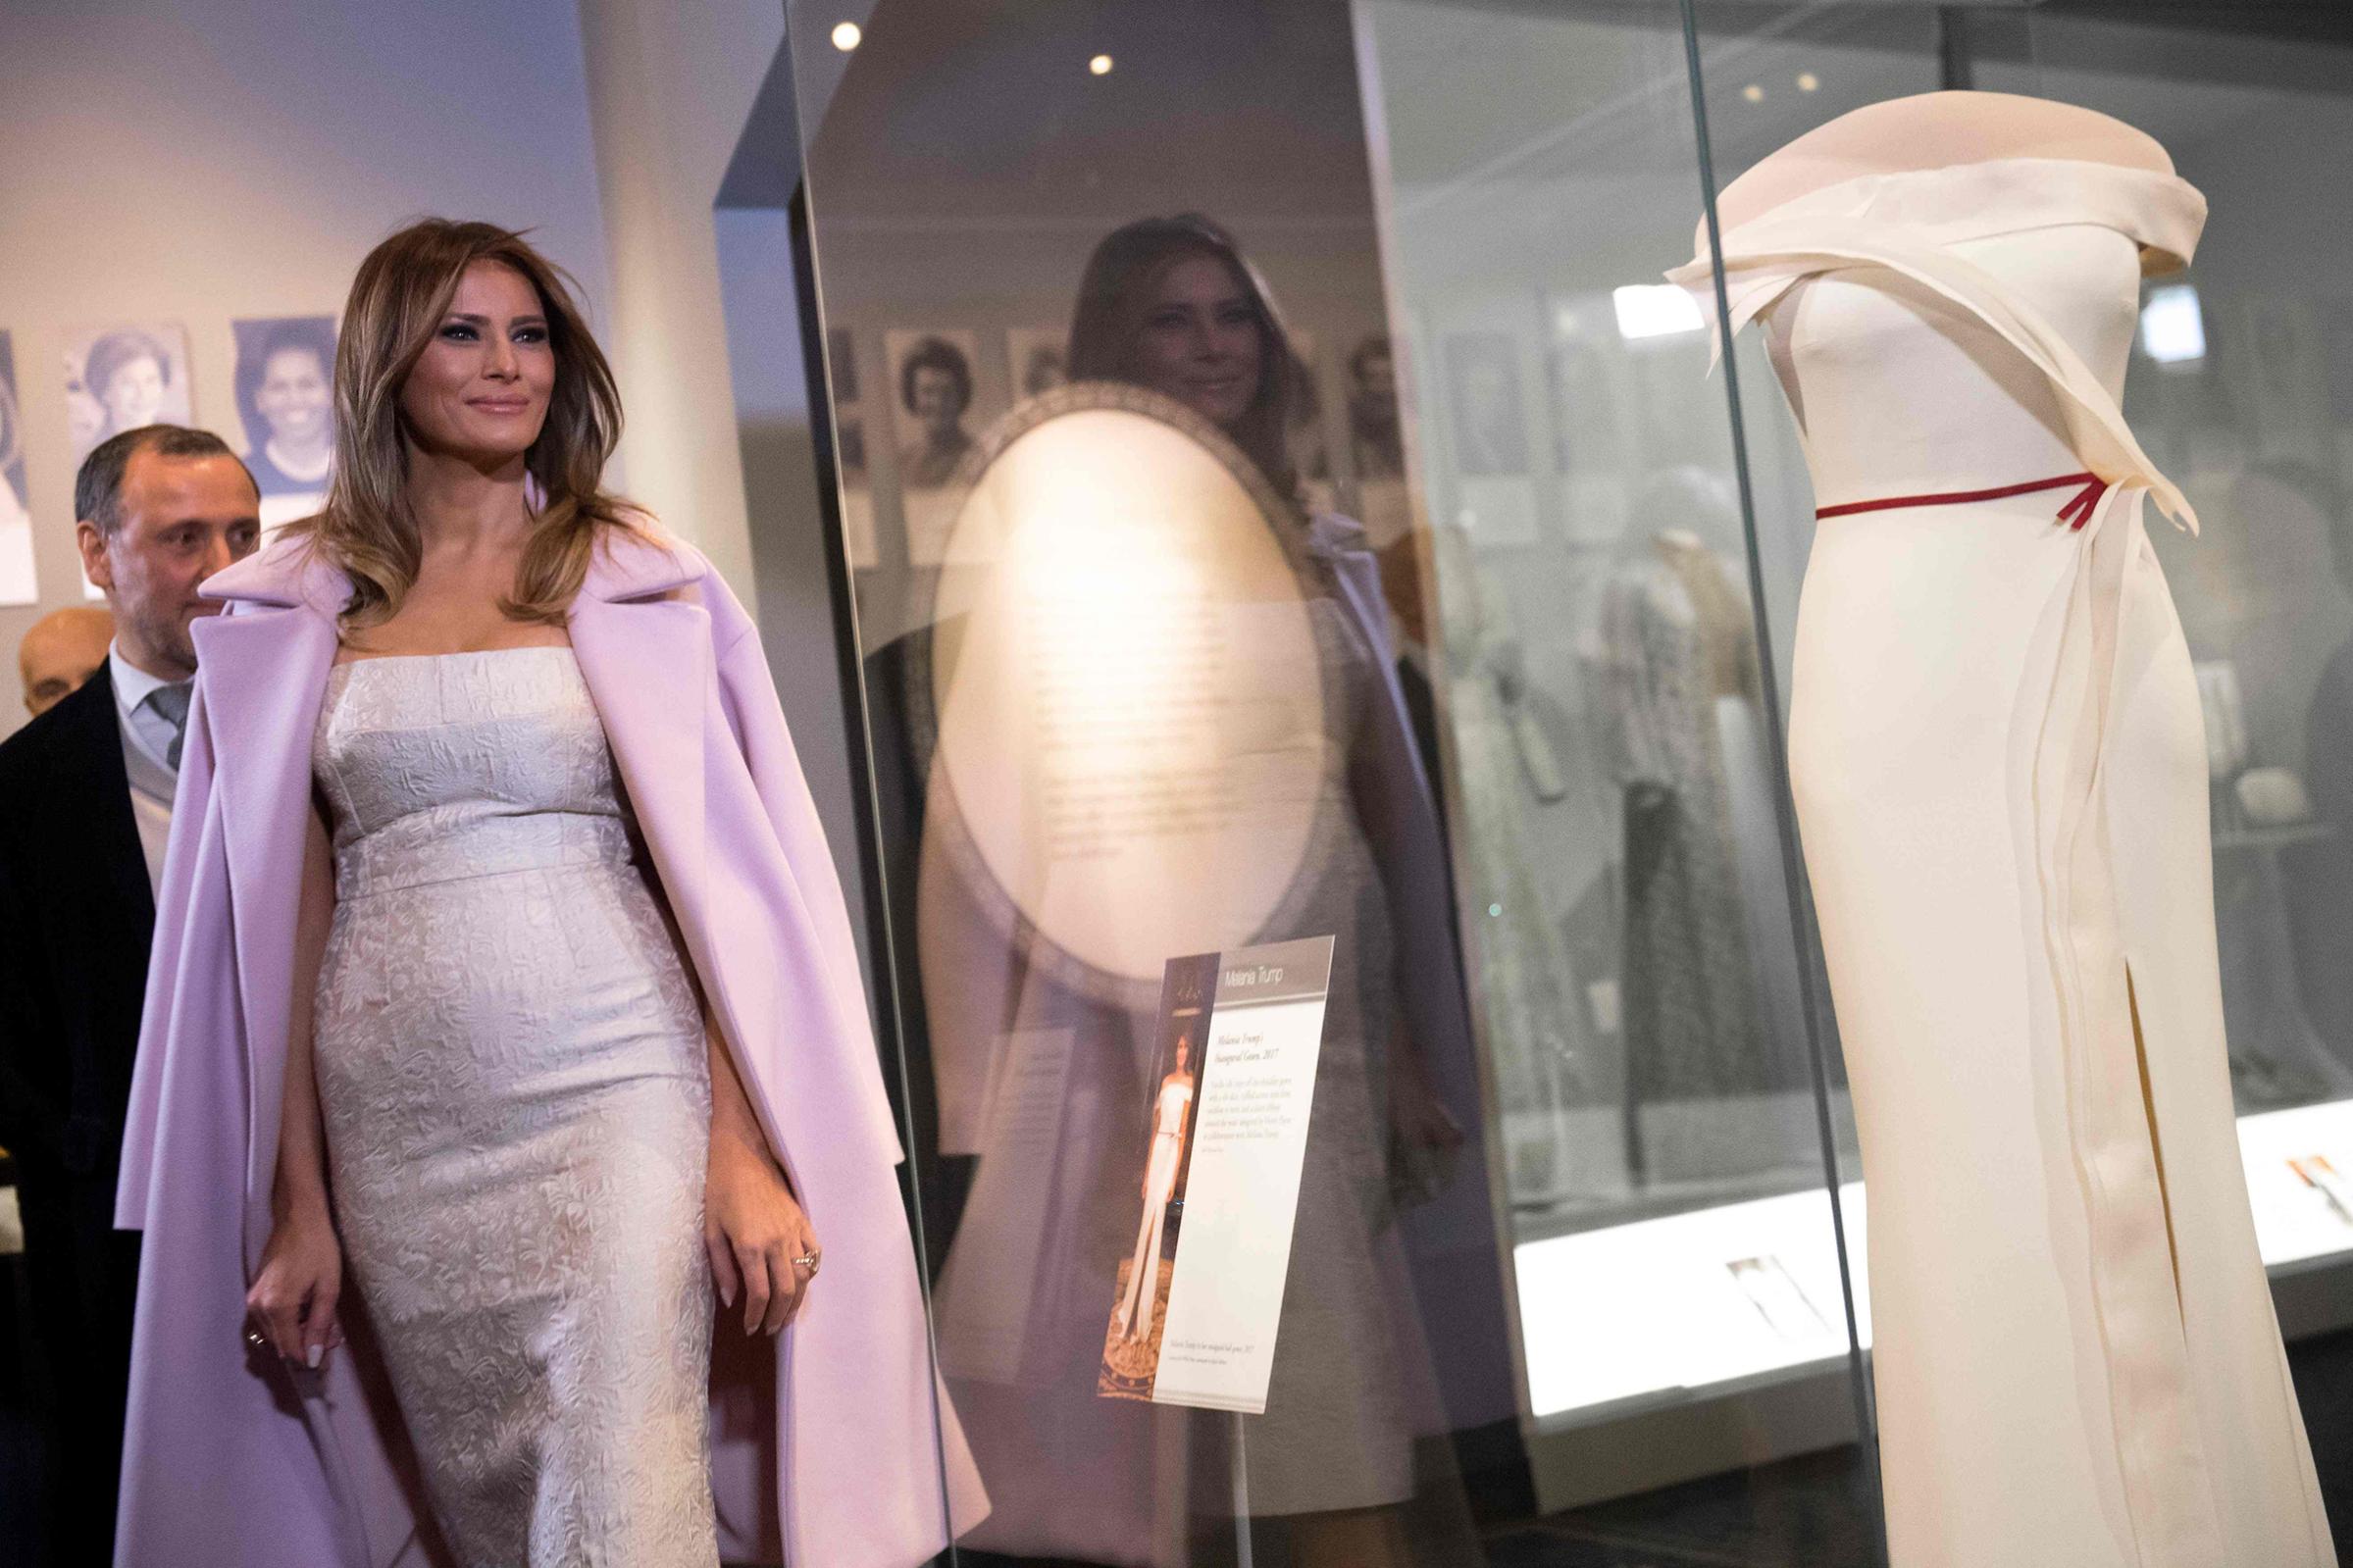 First lady Melania Trump wearing an ivory Dolce &amp; Gabbana dress stands next to Hervé Pierre and his gown, she wore to the 2017 inaugural balls as she donates the dress to the Smithsonian's First Ladies Collection at the Smithsonian National Museum of American History in Washington, DC, Oct. 20, 2017.